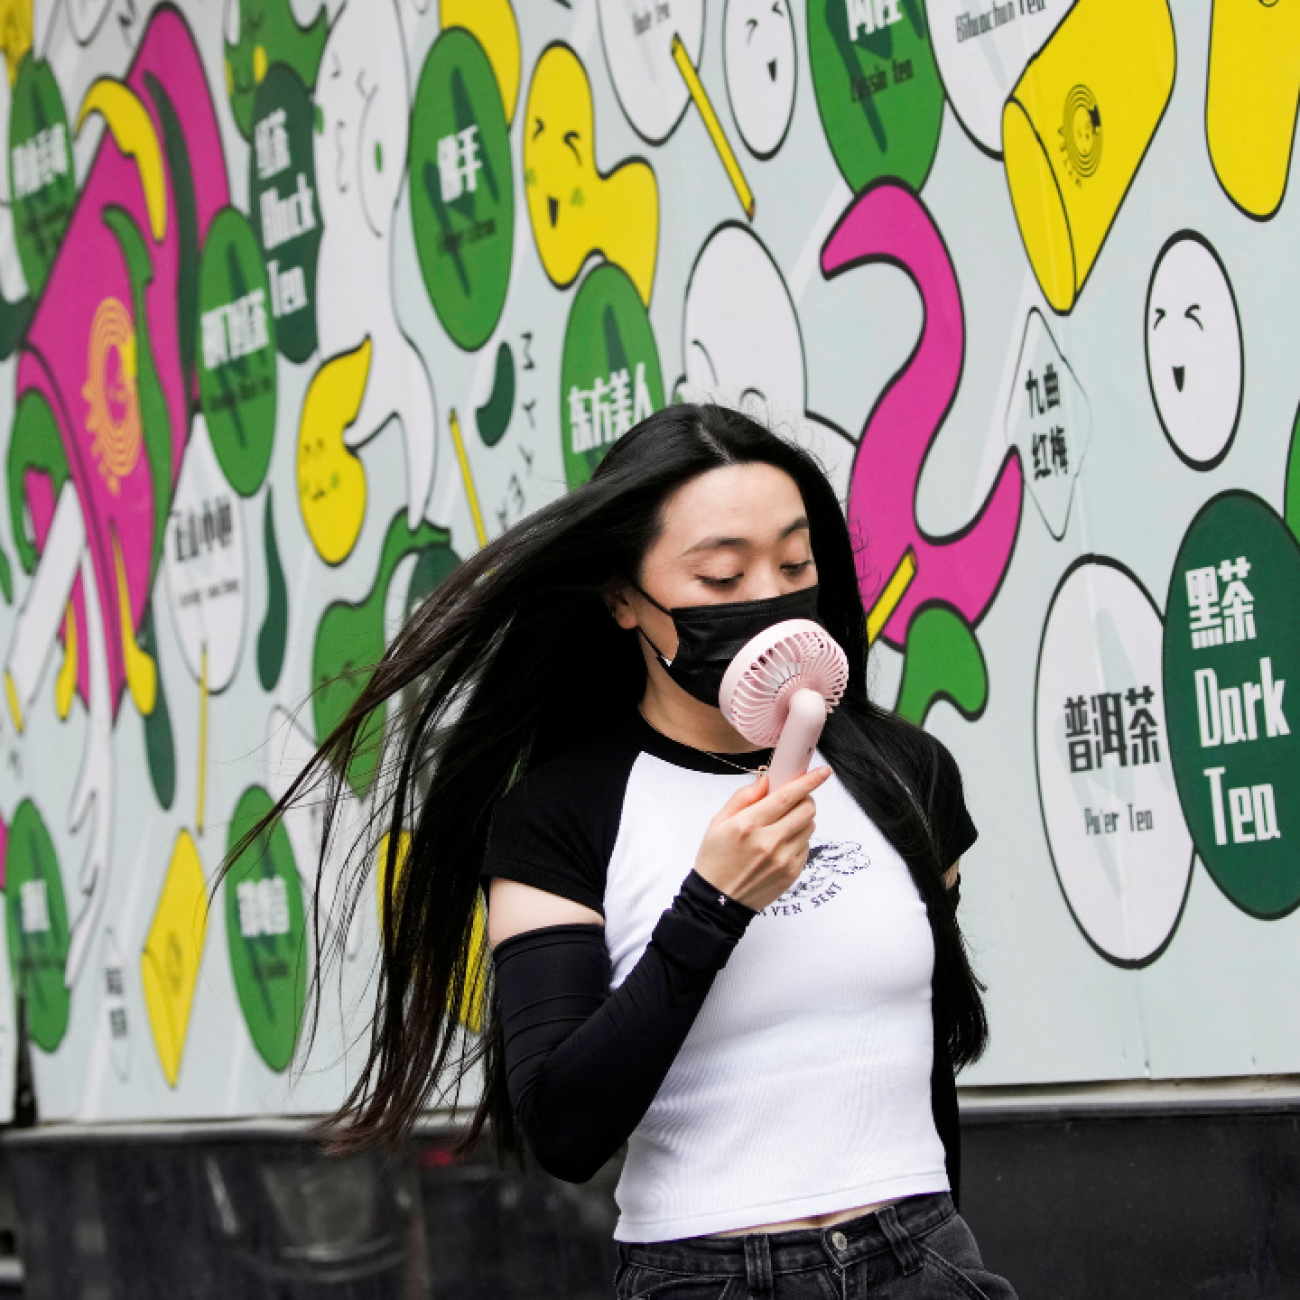 A woman in a white and black t-shirt wears a face mask uses a handheld fan as she walks on a street on a hot day, following the coronavirus disease (COVID-19) outbreak in Shanghai, China July 19, 2022. A colorful white, green, pink and yellow mural is pictured in the background.